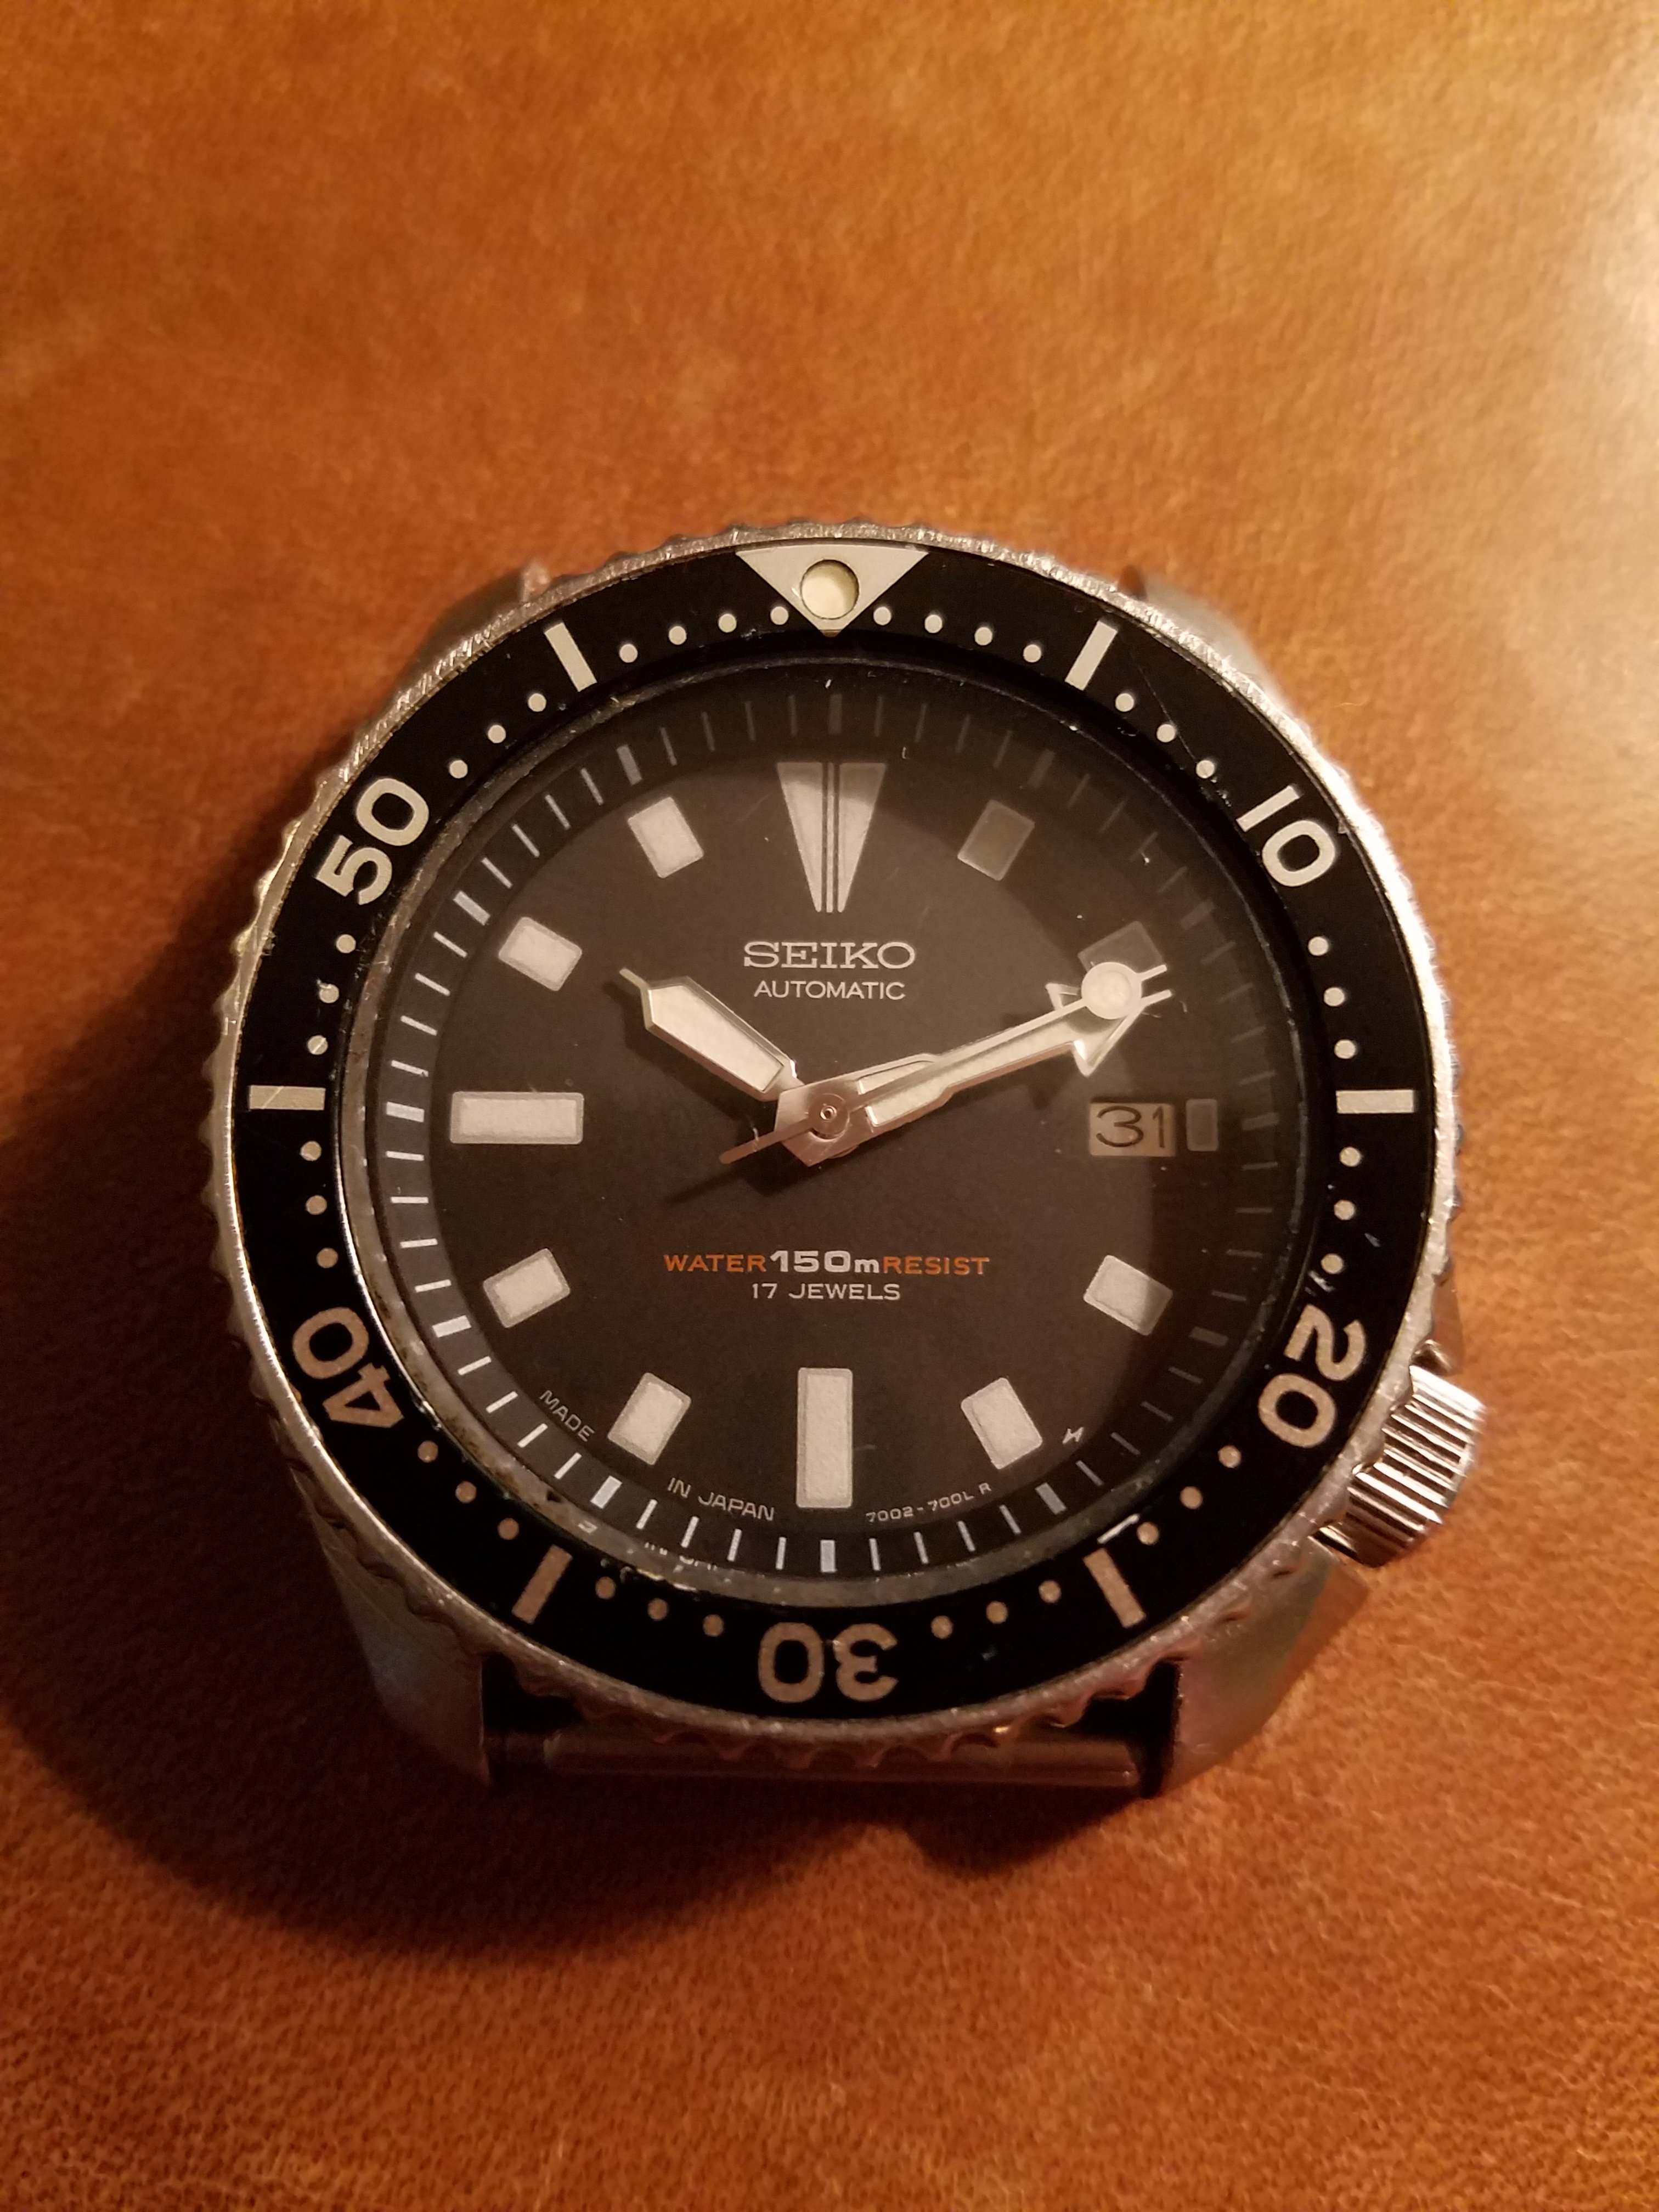 SOLD - JDM Seiko Diver Auto 7002-7001 41mm | Omega Forums